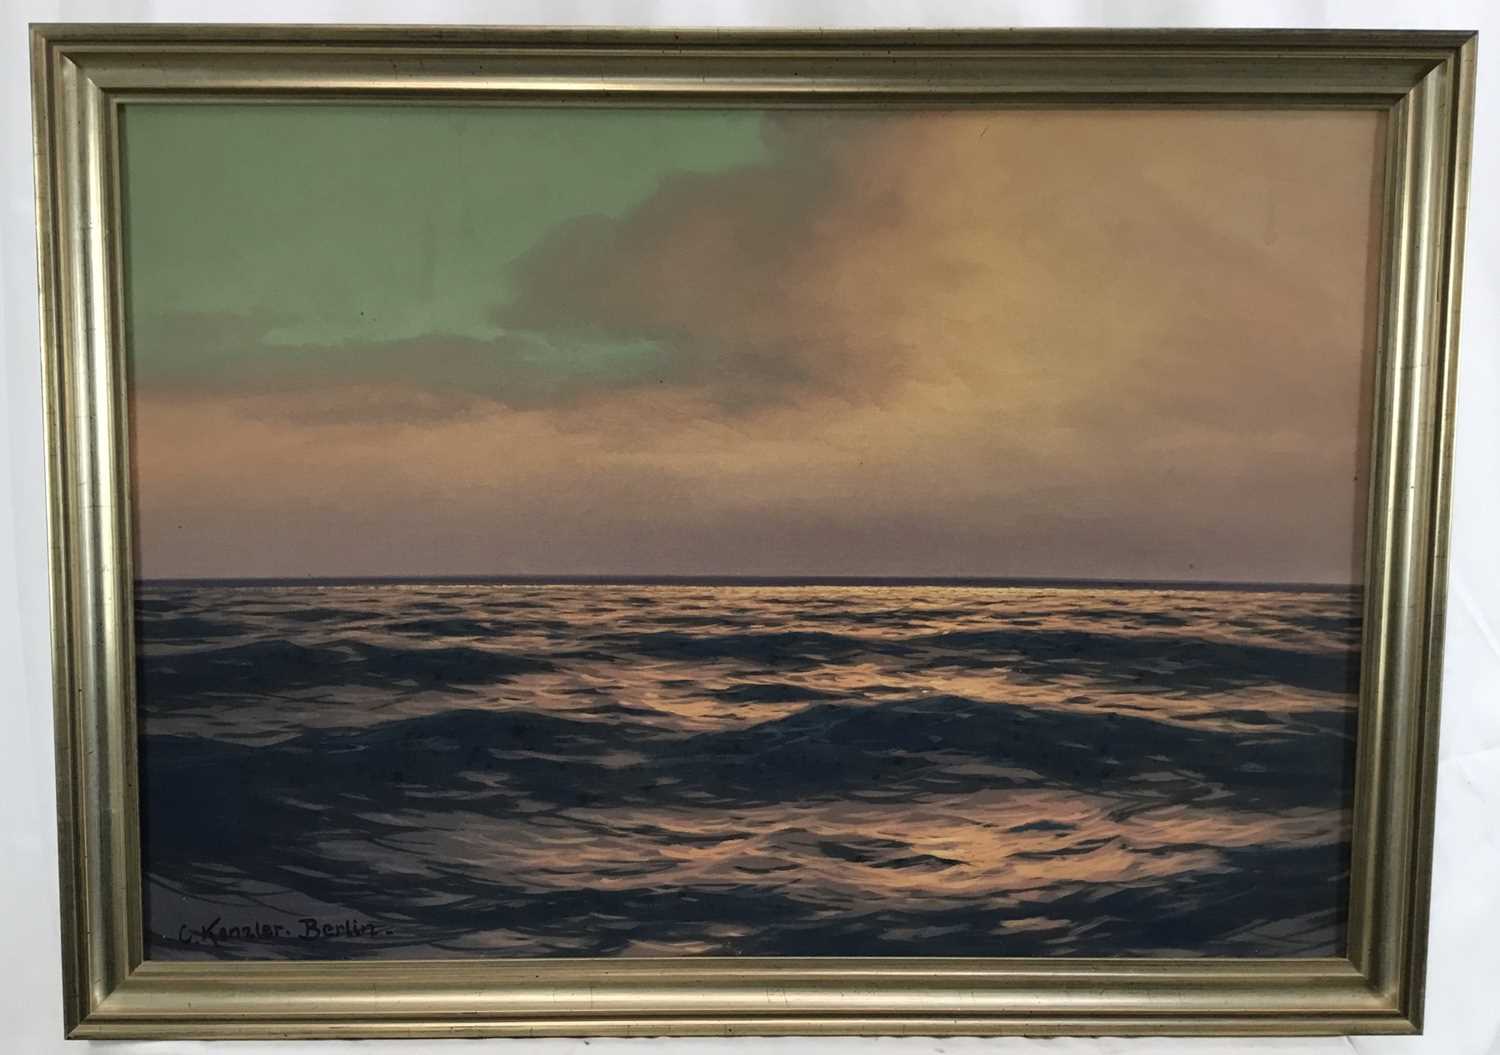 Lot 150 - Carl Kenzler (1872-1947), oil on board - Seascape, signed and inscribed Berlin, in gilt frame  
Provenance: bought out of Germany in 1938 by the vendors late parents thence by family descent